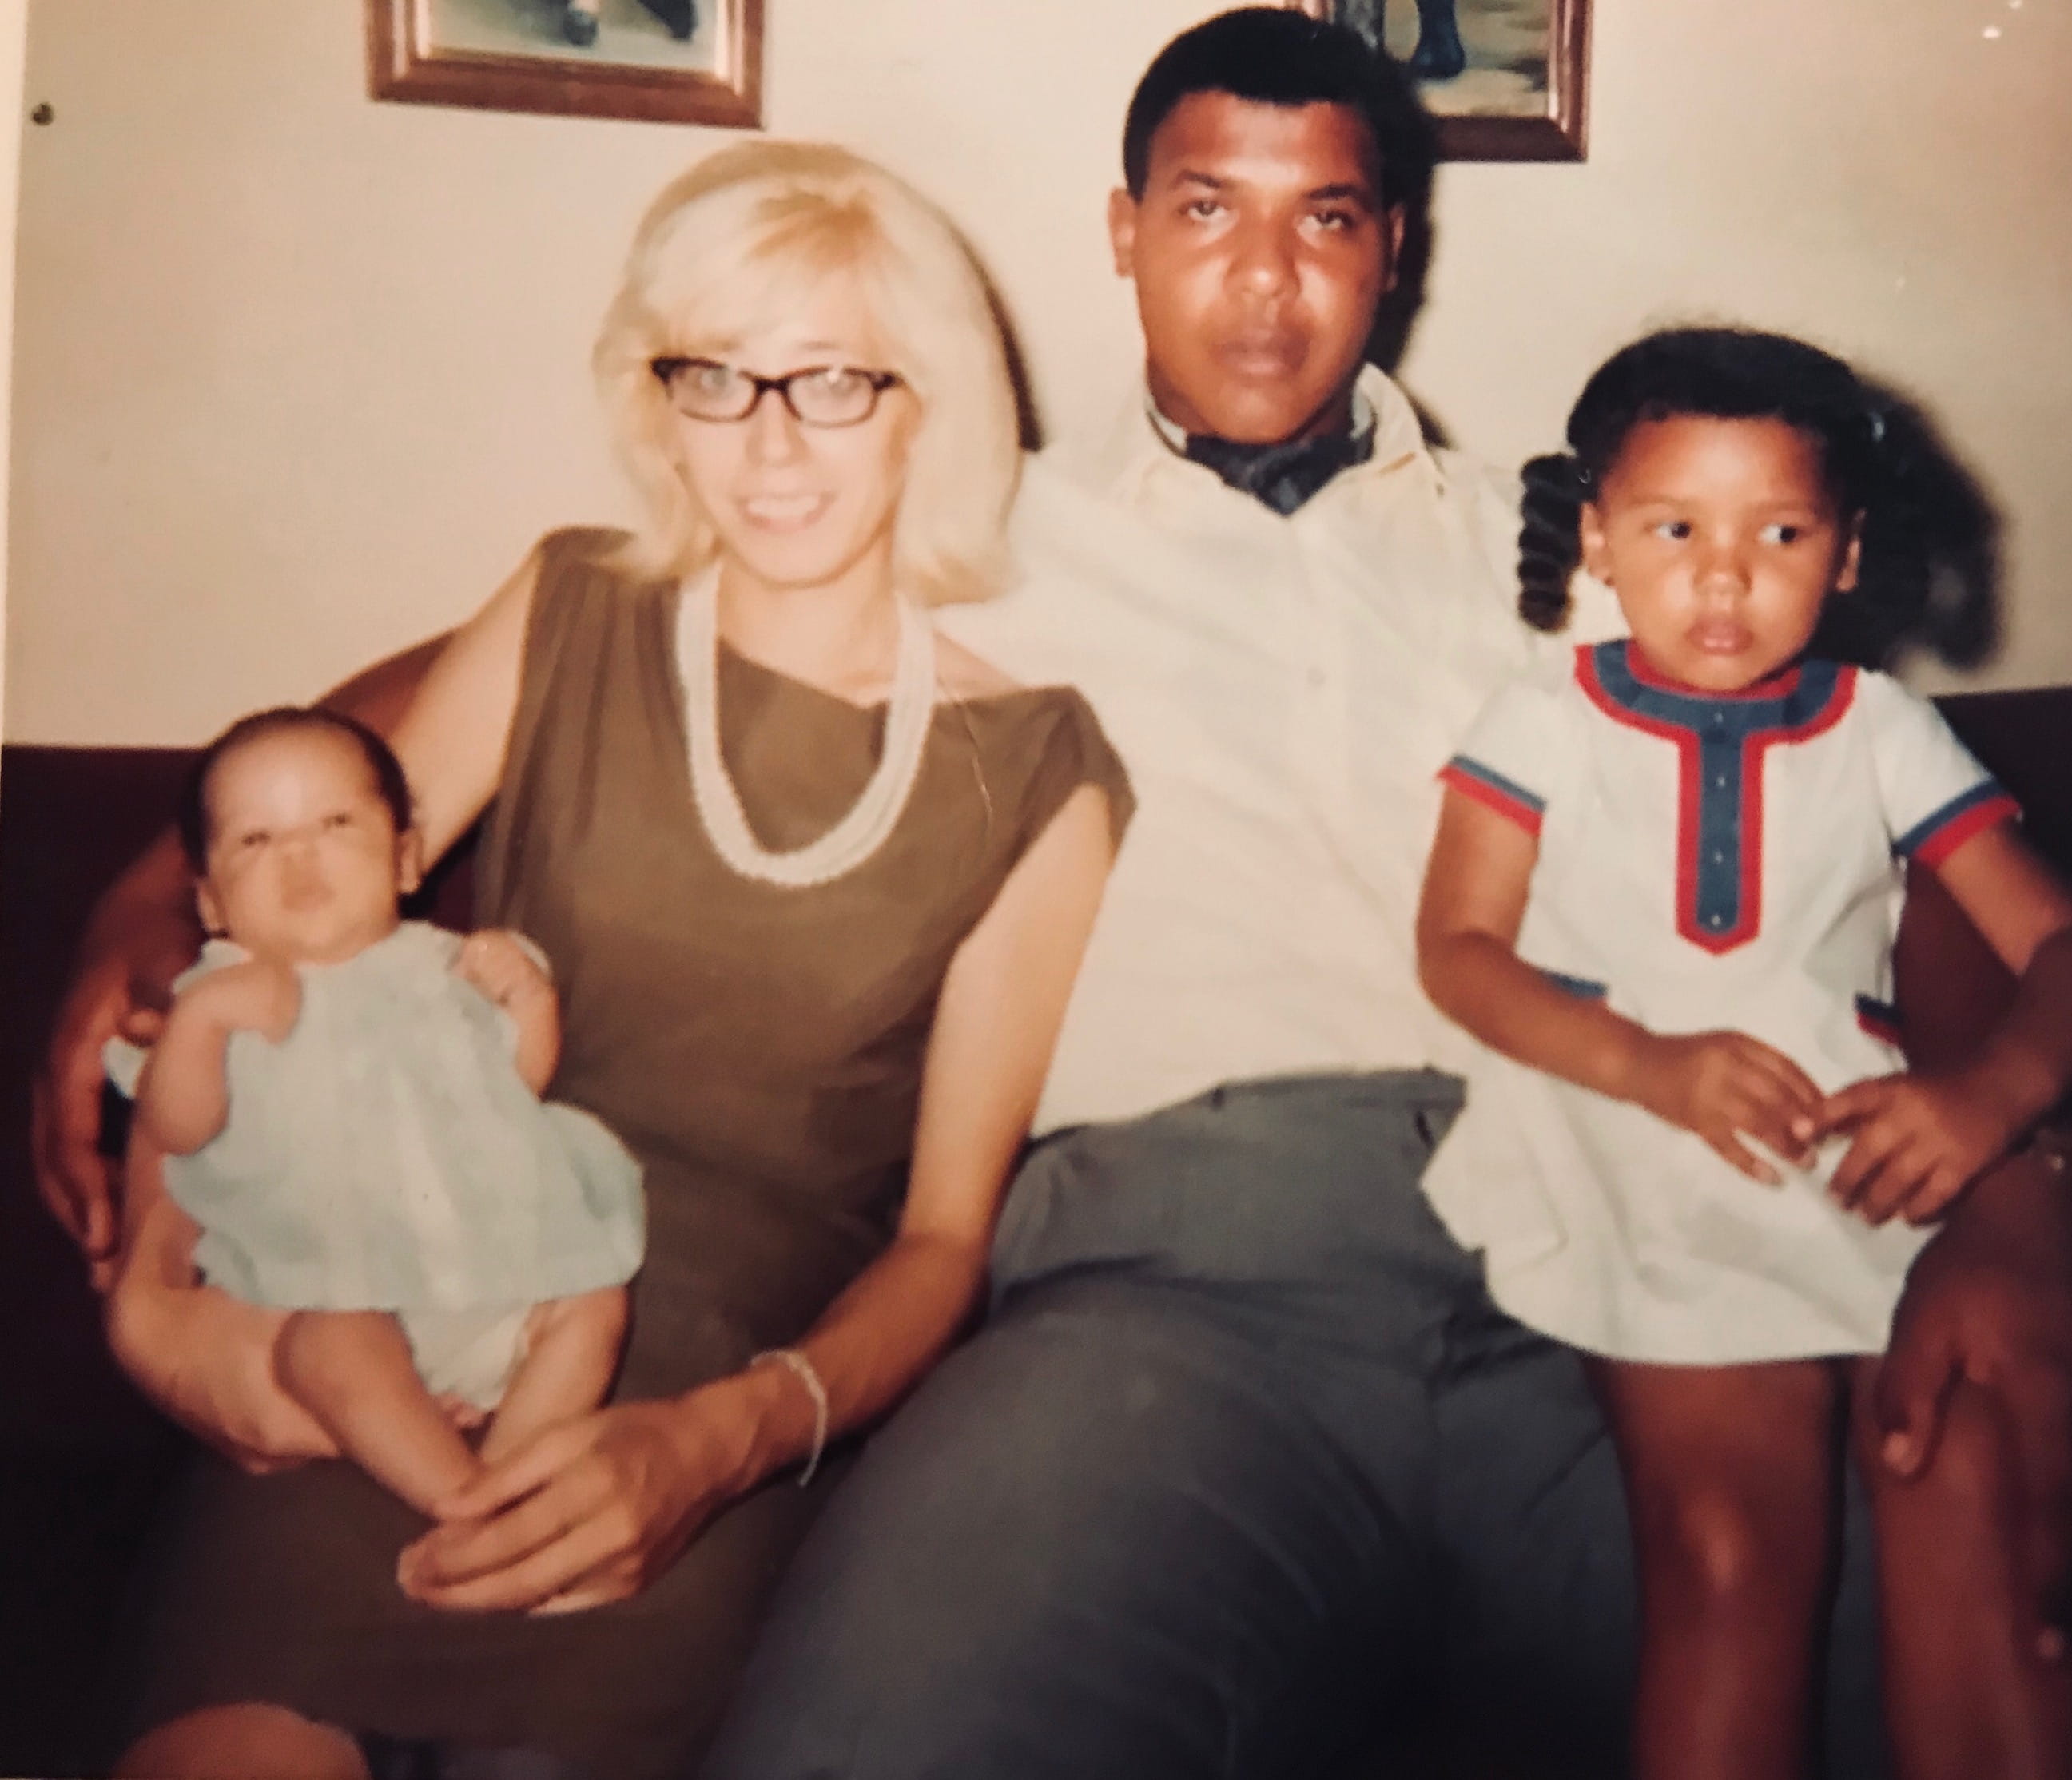 old photo of family sitting on couch. there is a mom and dad and on either end is a baby and an toddler